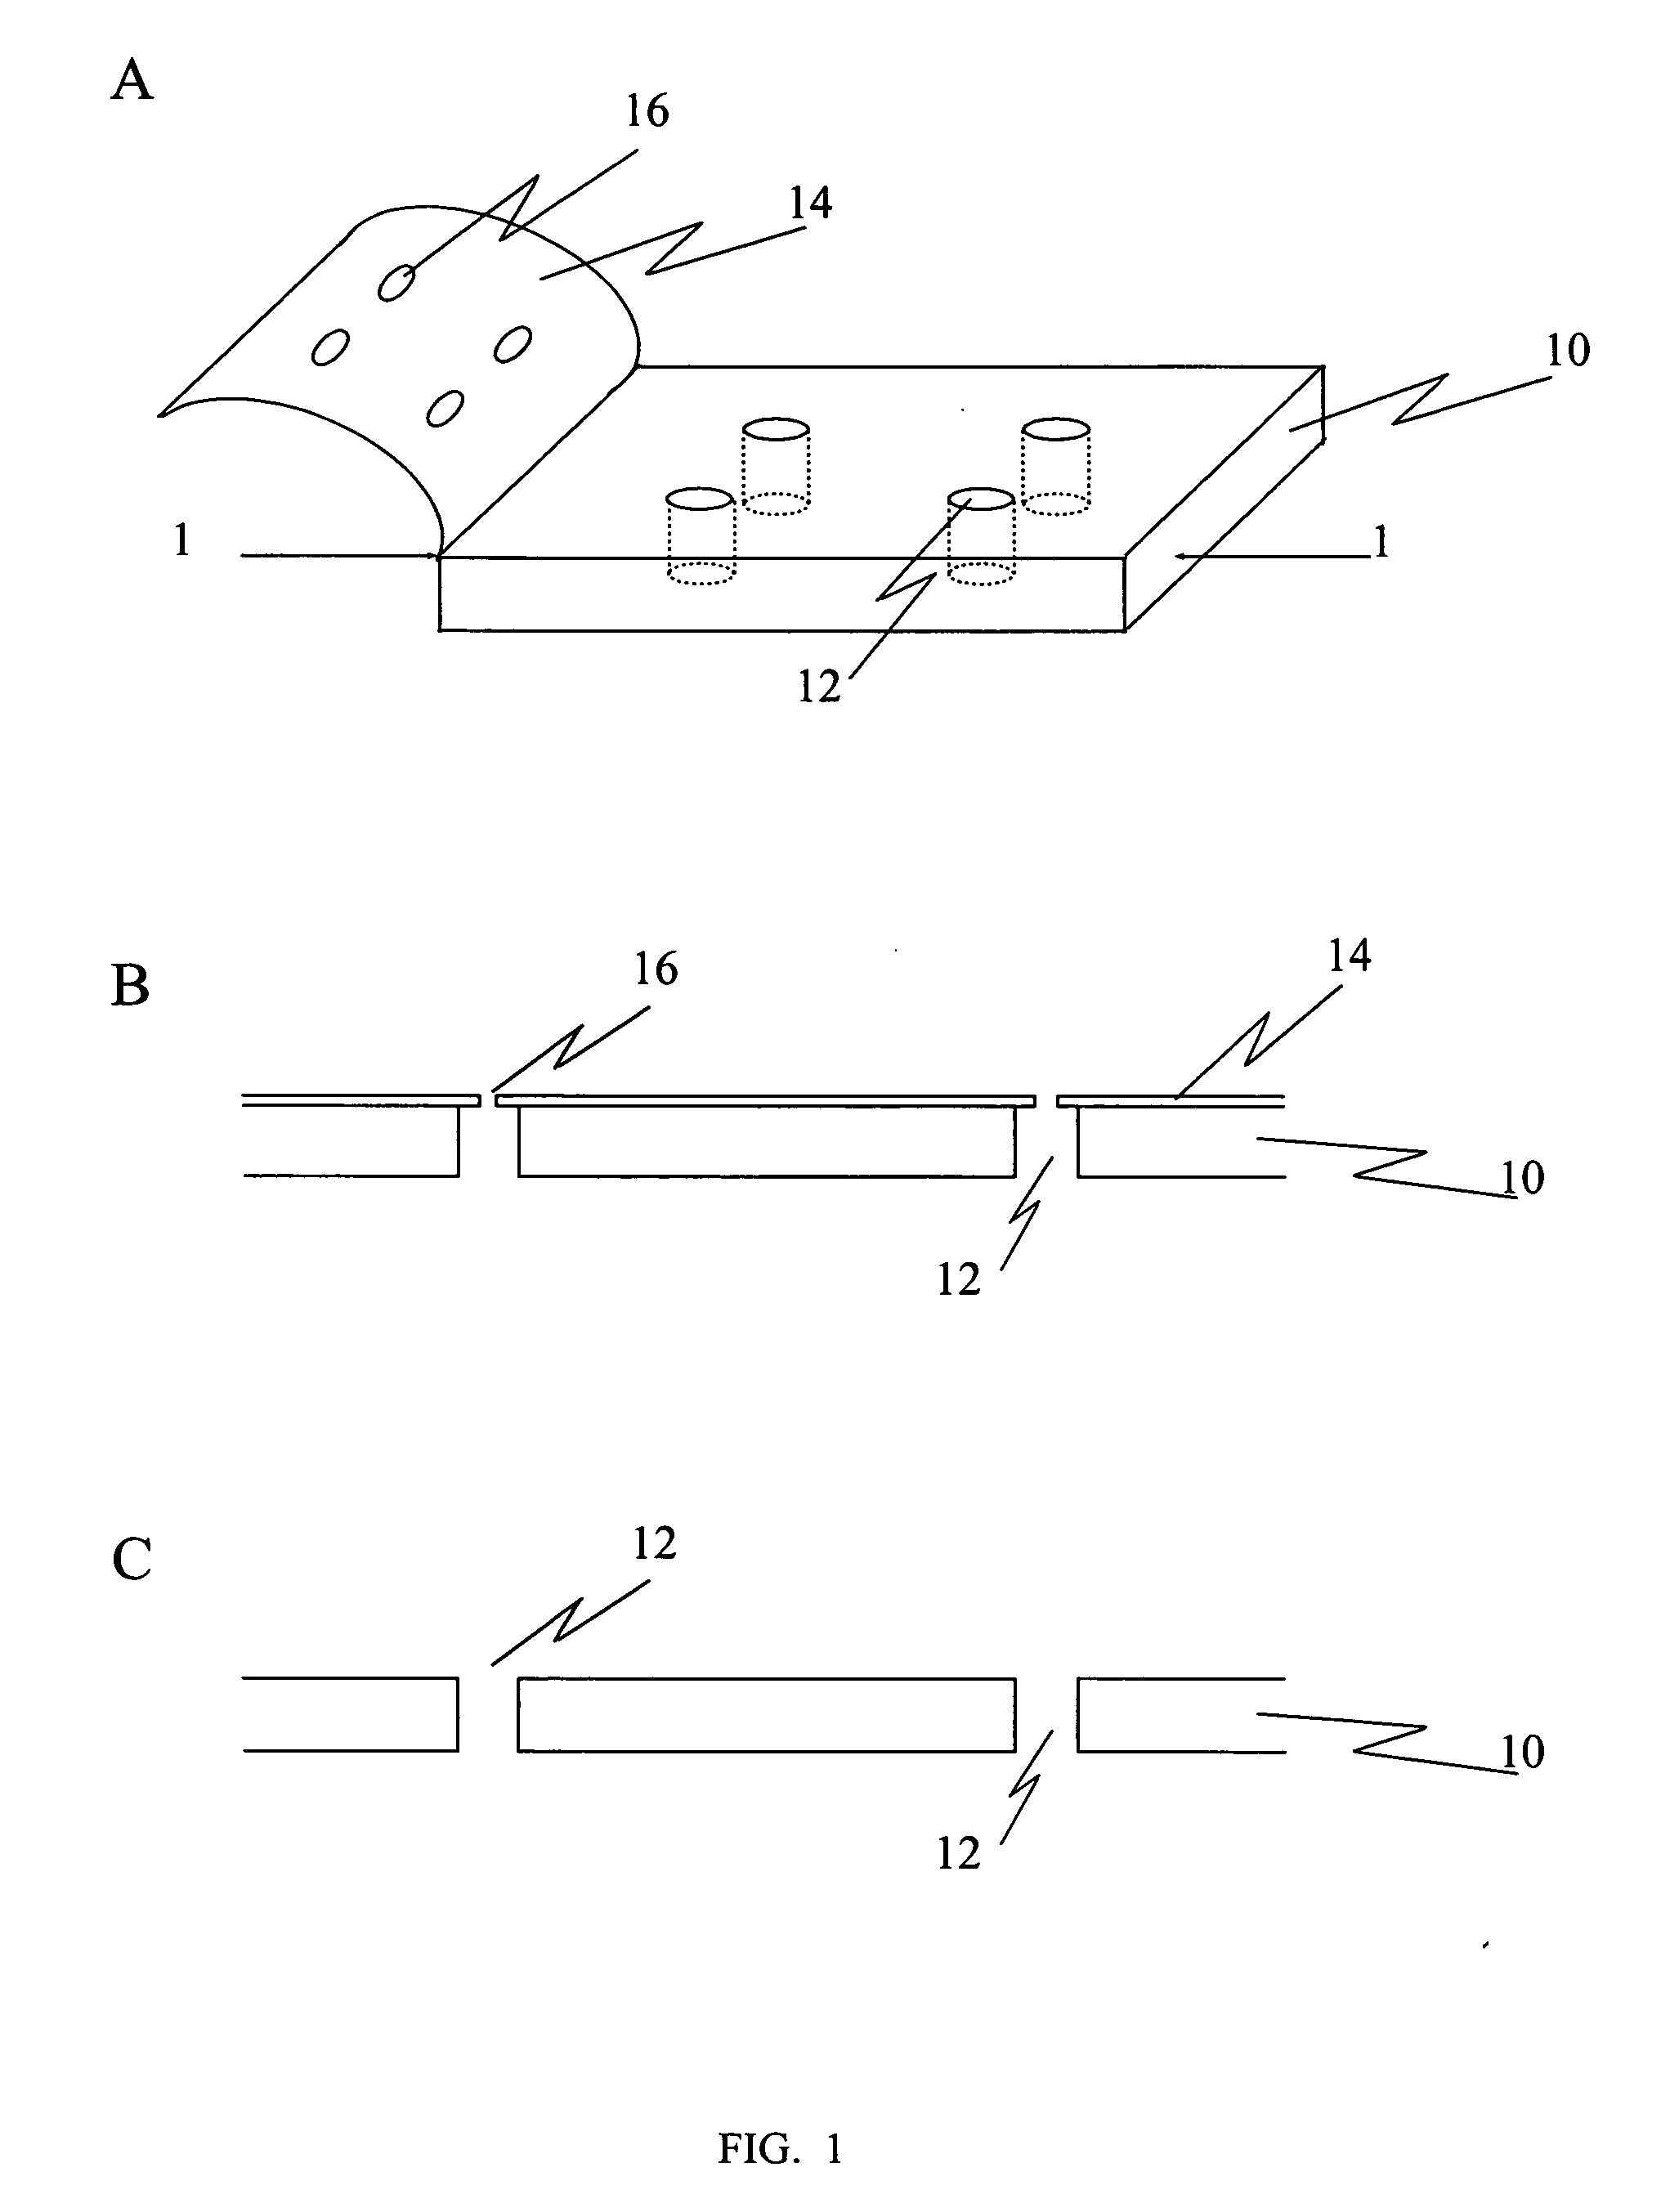 Apparatus including ion transport detecting structures and methods of use